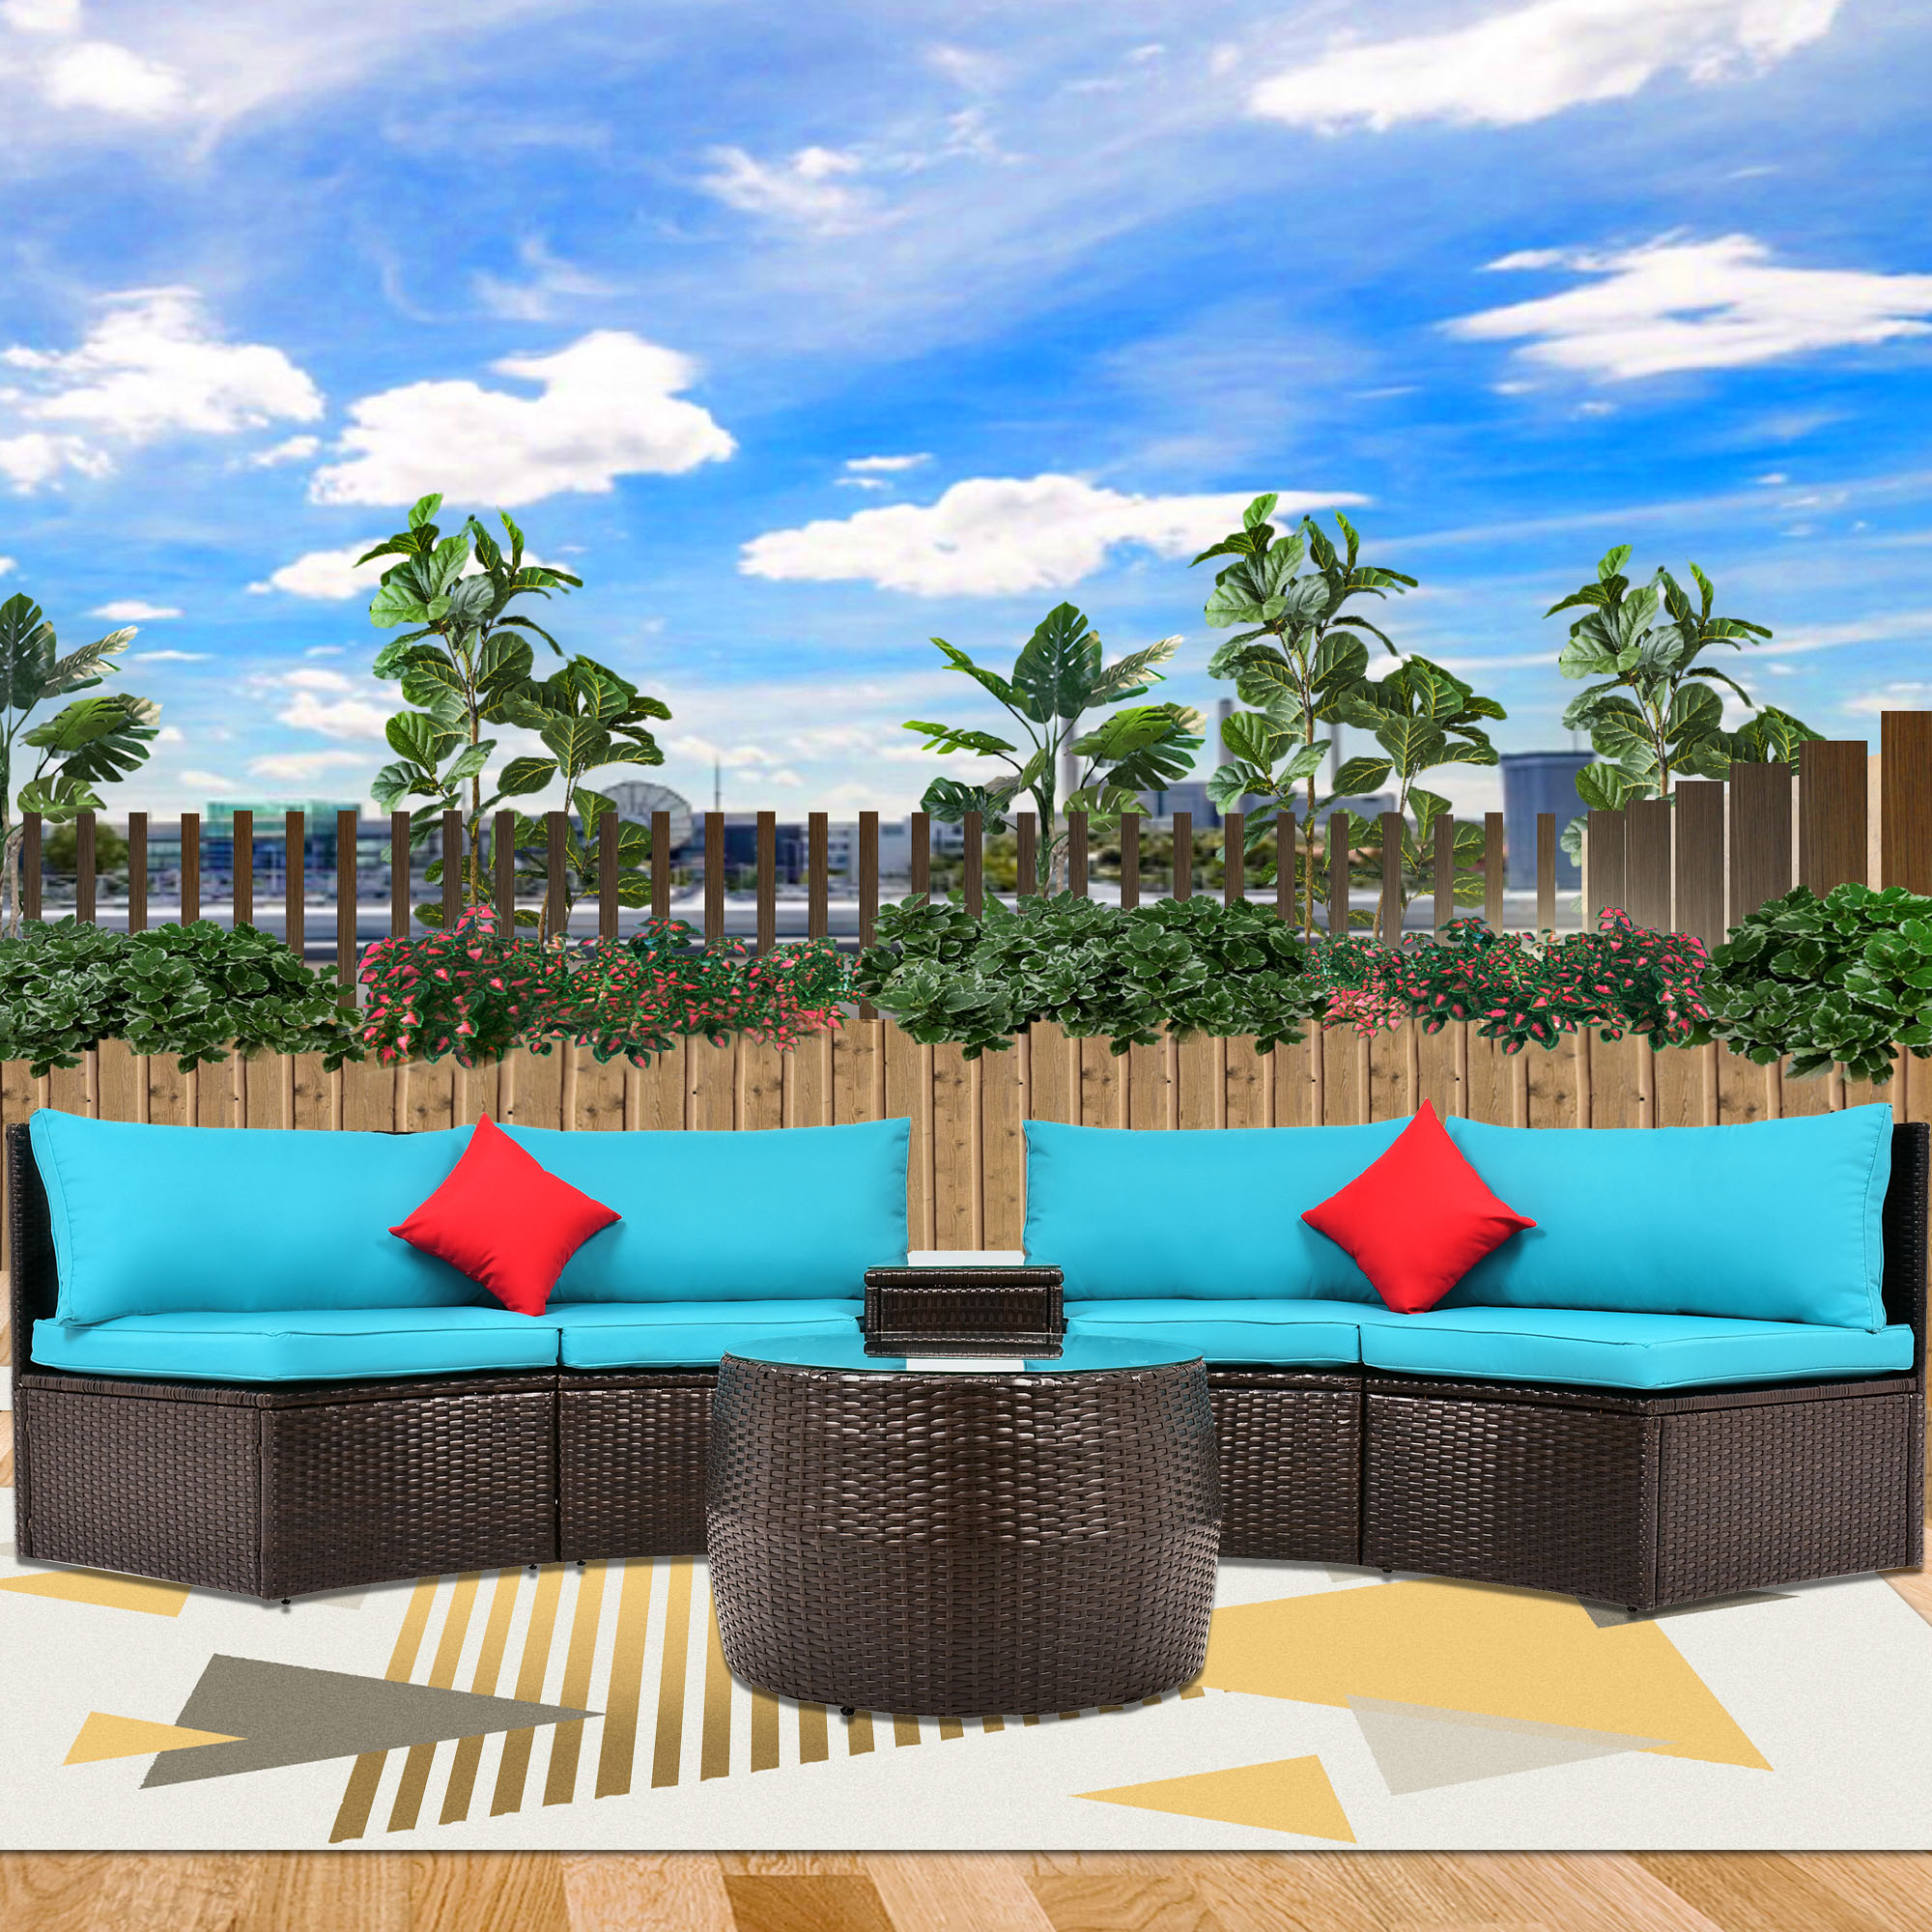 Outdoor Patio Sectional Furniture Wicker Sofa Set, 4-Piece Wicker Patio Conversation Furniture Set with 2 Double Half-Moon Sofa, 1 Coffee Table, 1 Side Table, 2 Pillow, Blue Padded Cushions, S1605 - image 1 of 9